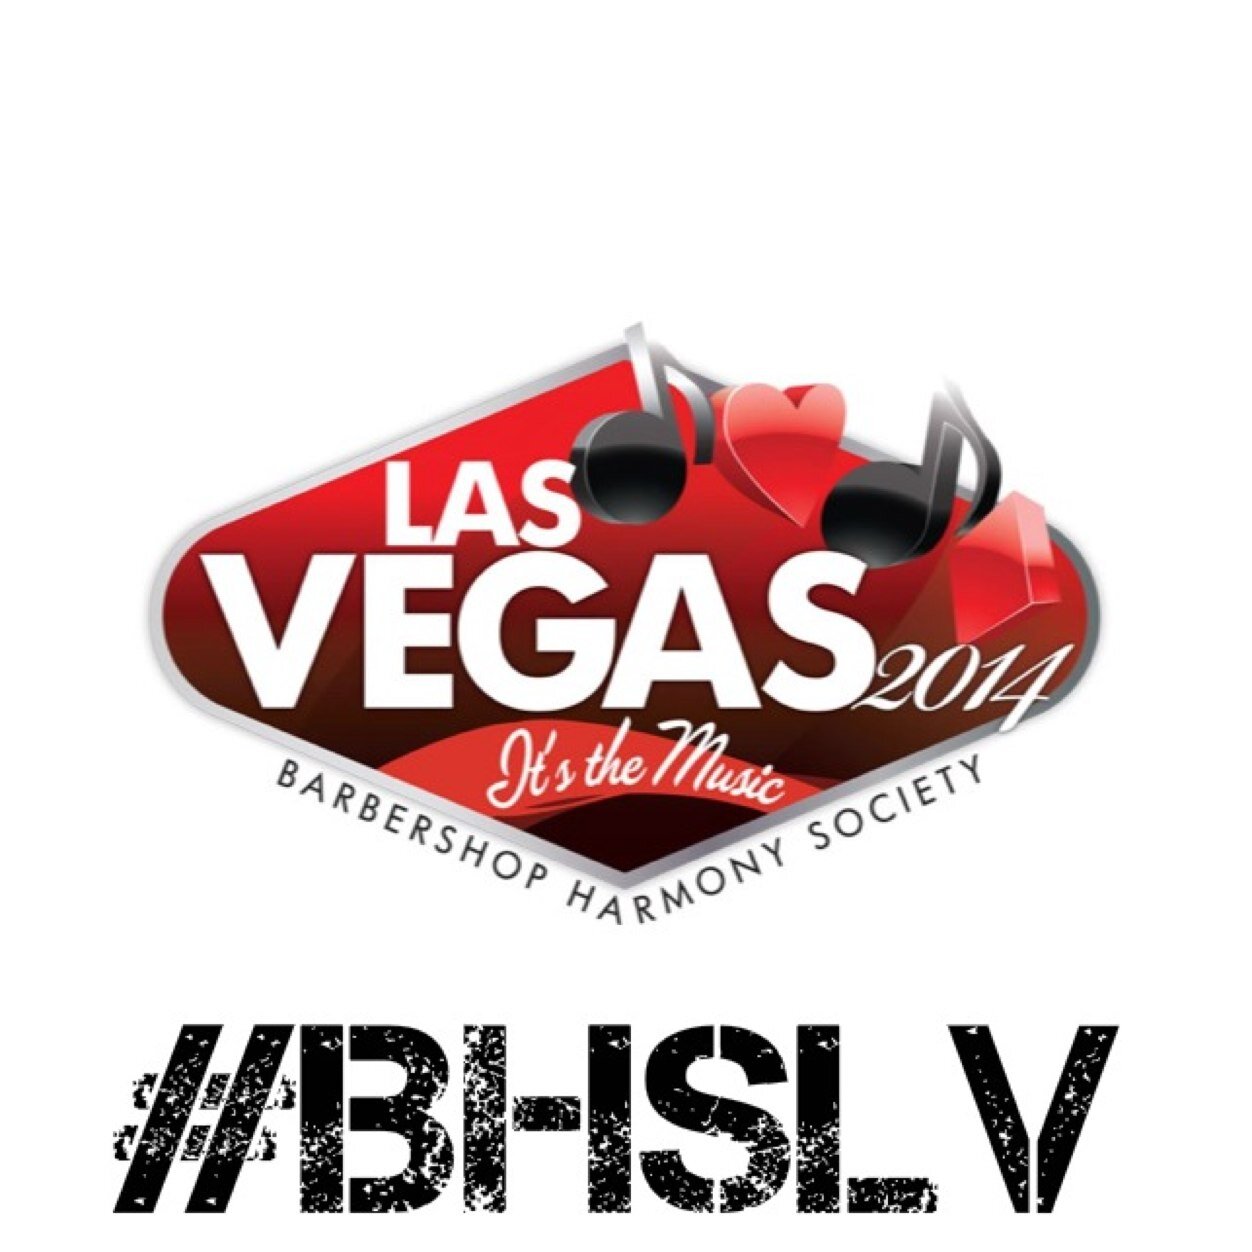 This summer BARBERSHOP comes to LAS VEGAS! Get your tickets today at http://t.co/8pif66kViD

#BHSLV